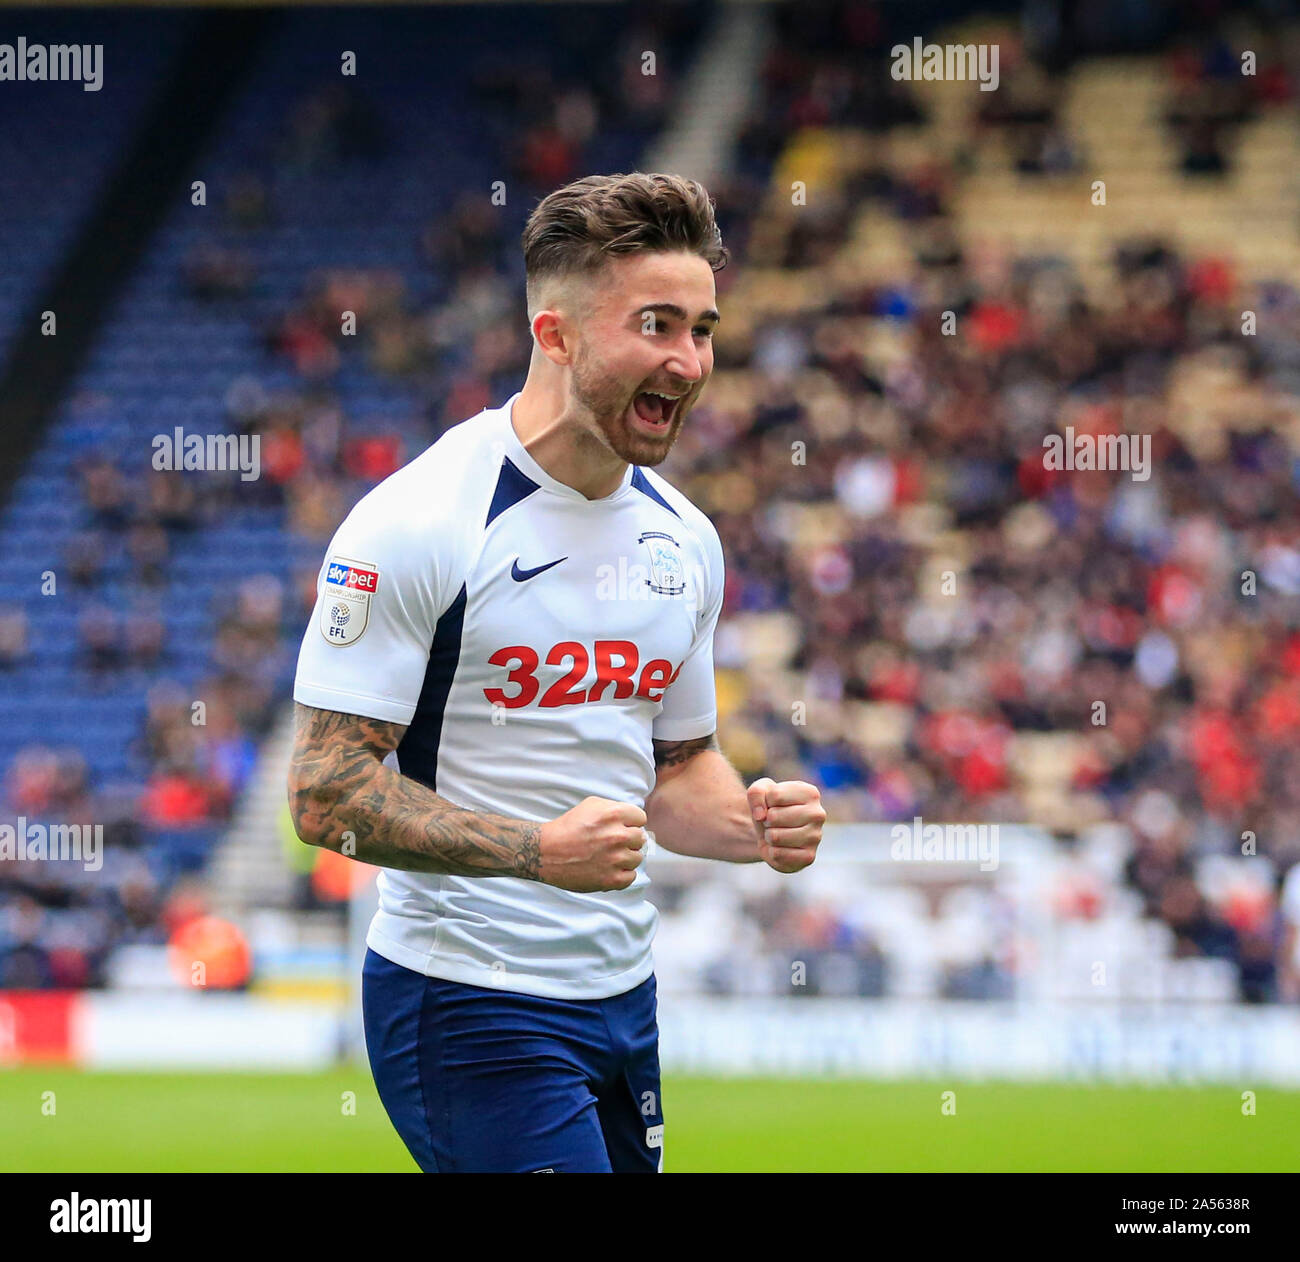 5th October 2019, Deepdale, Preston, England; Sky Bet Championship, Preston North End v Barnsley : Sean Maguire (24) runs to celebrate the goal by Thomas Barkhuizen (29) of Preston North End who scored in the 50th minute to make it 2-1 to Preston Credit: Conor Molloy/News Images Stock Photo